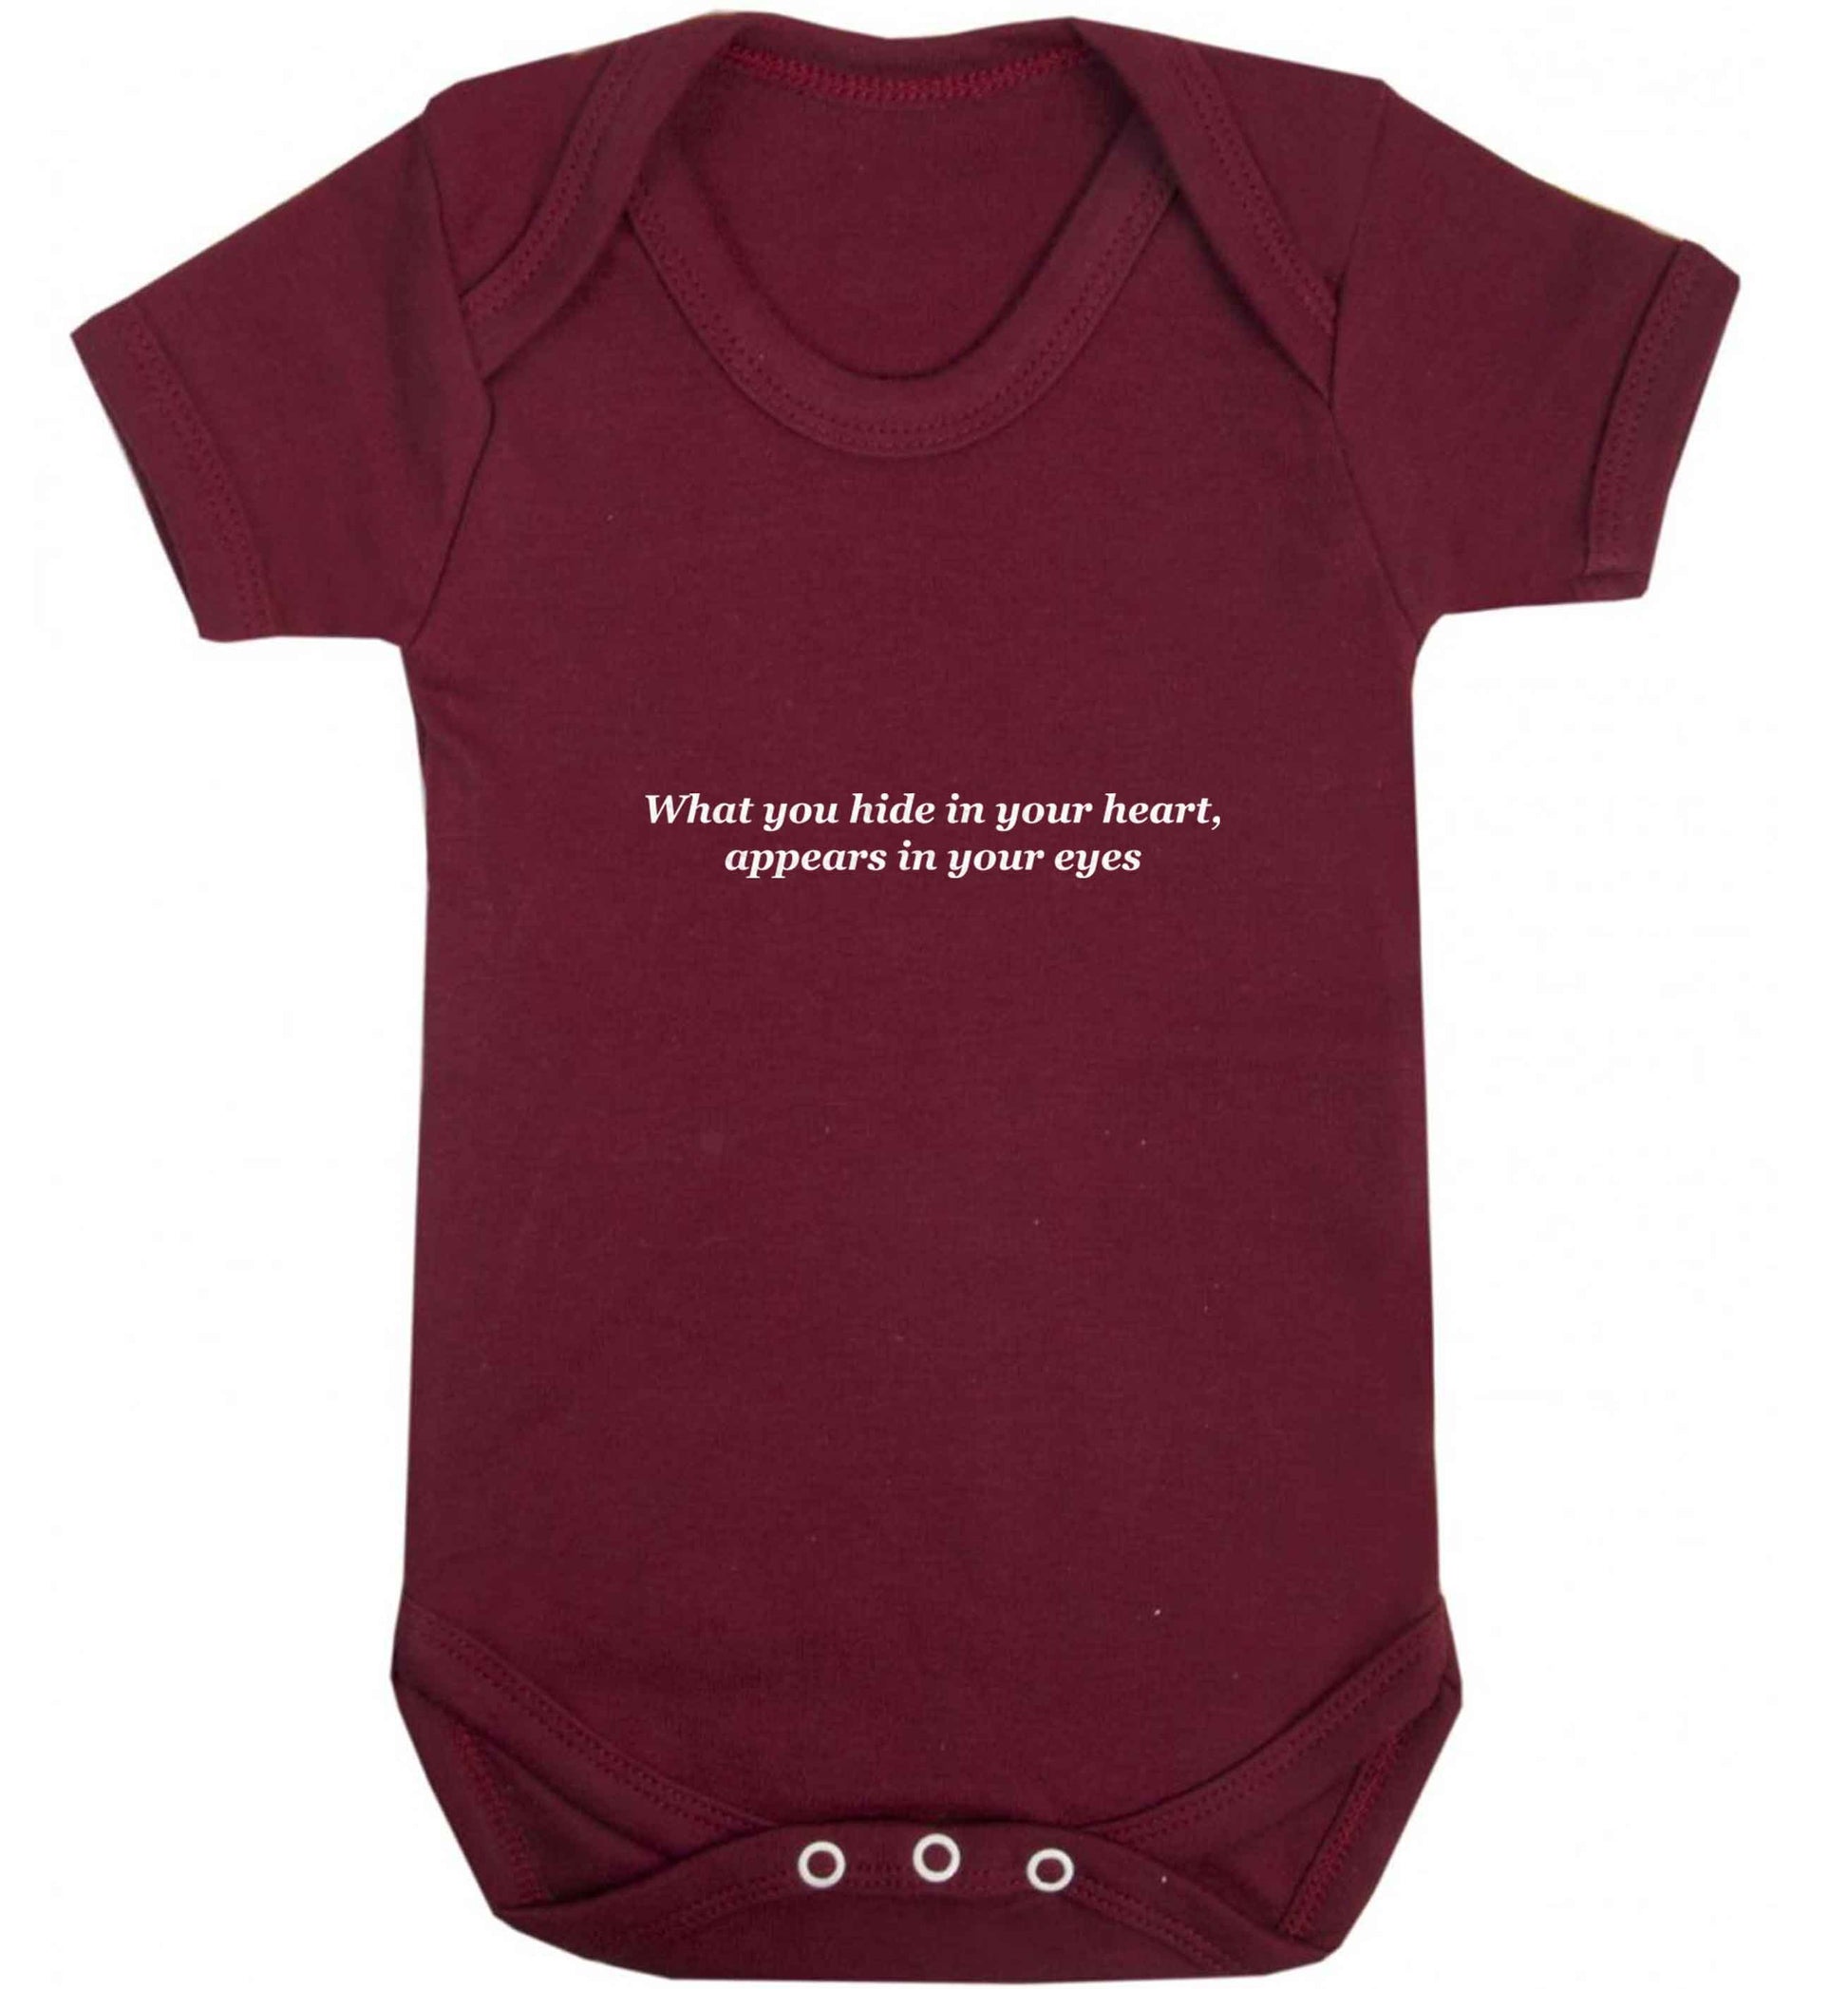 What you hide in your heart, appears in your eyes baby vest maroon 18-24 months